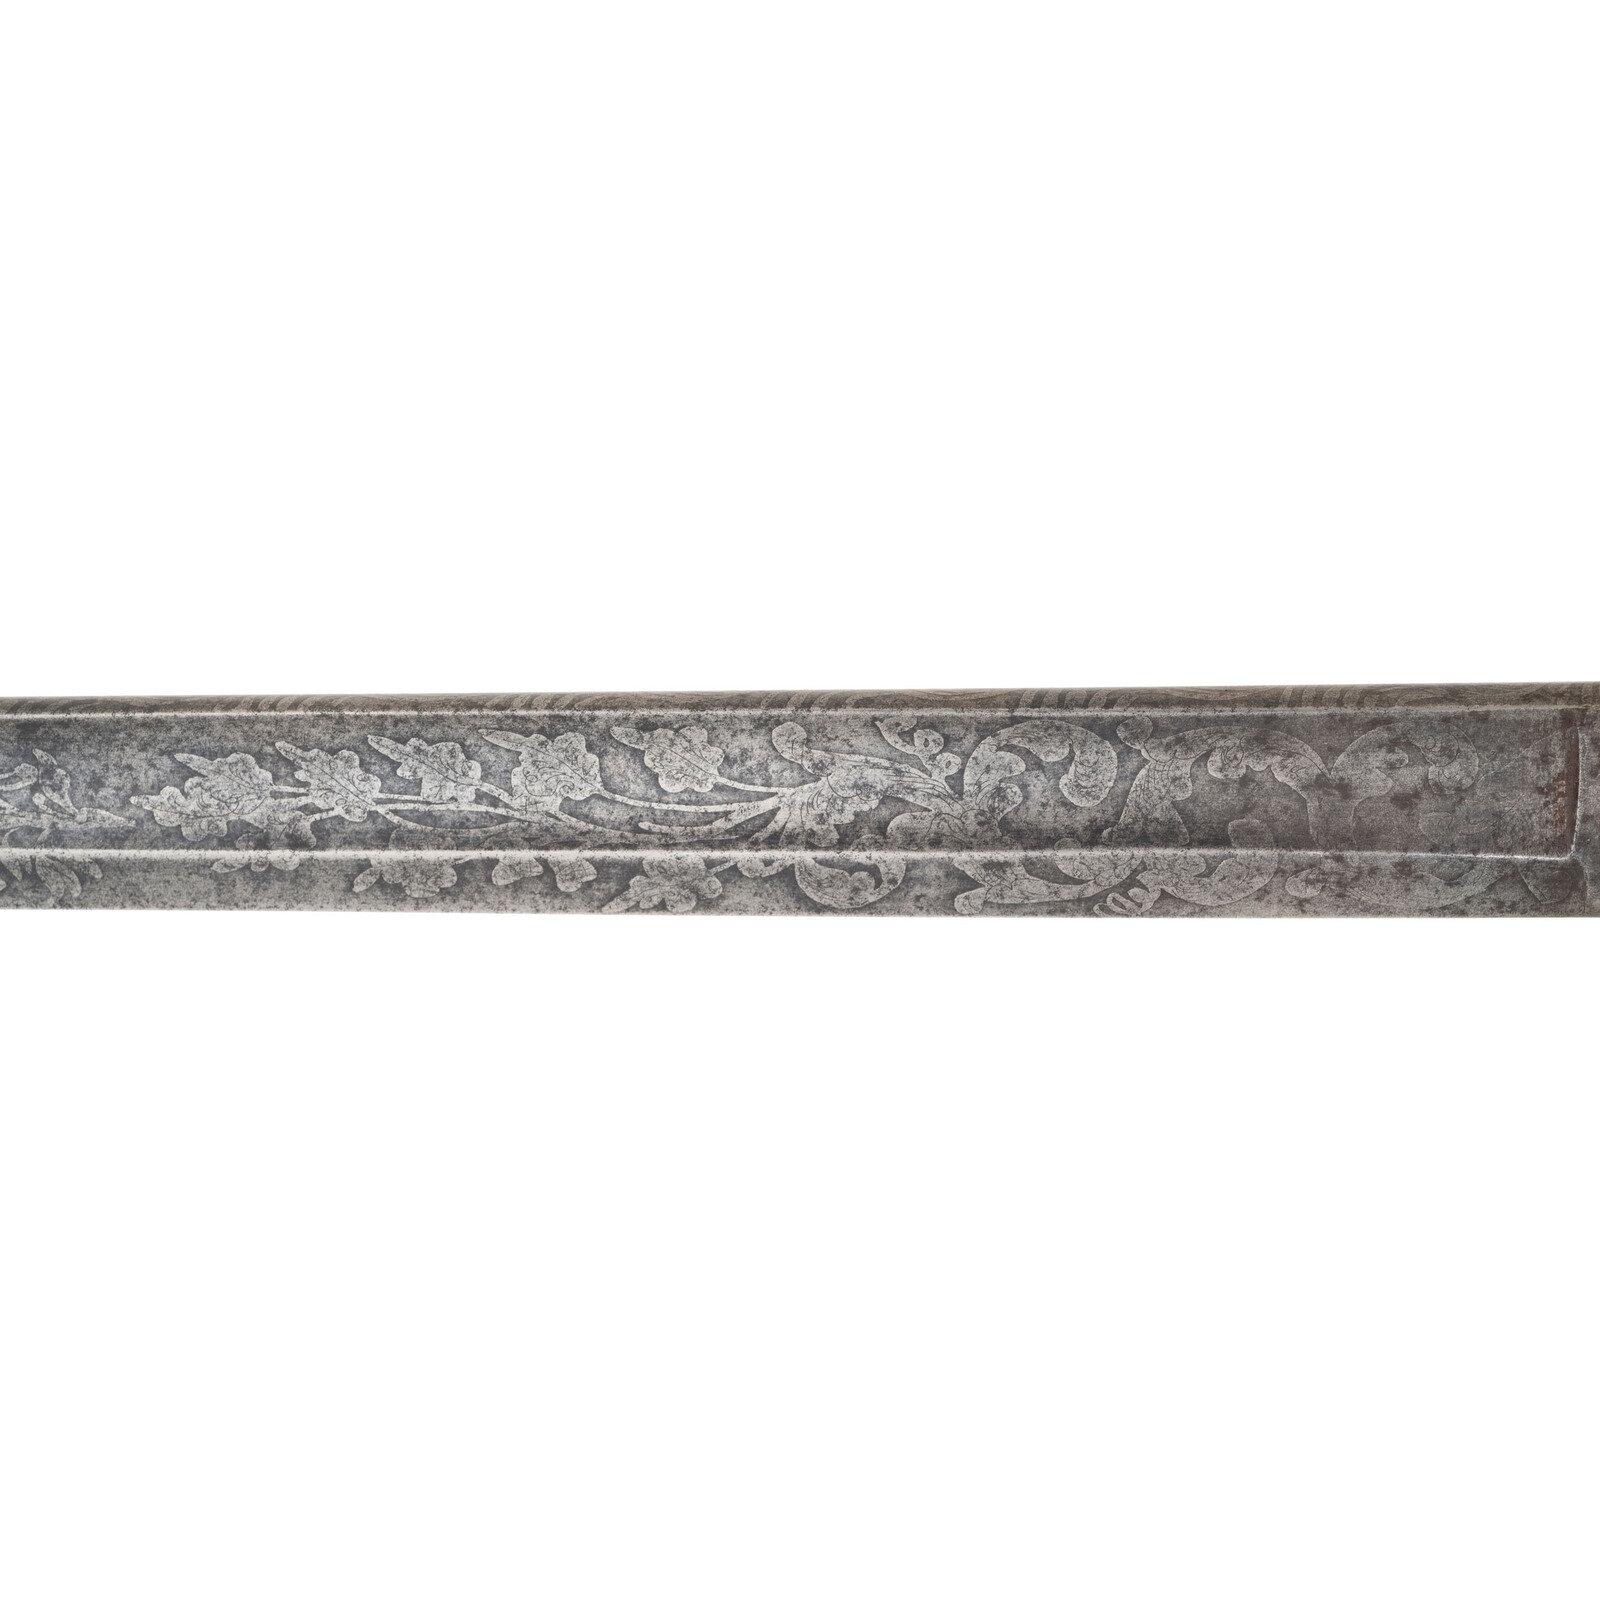 Ames Model 1851 General Officers' Sword Inscribed from Confederate Col. WW Horton to Capt. PH Thomas